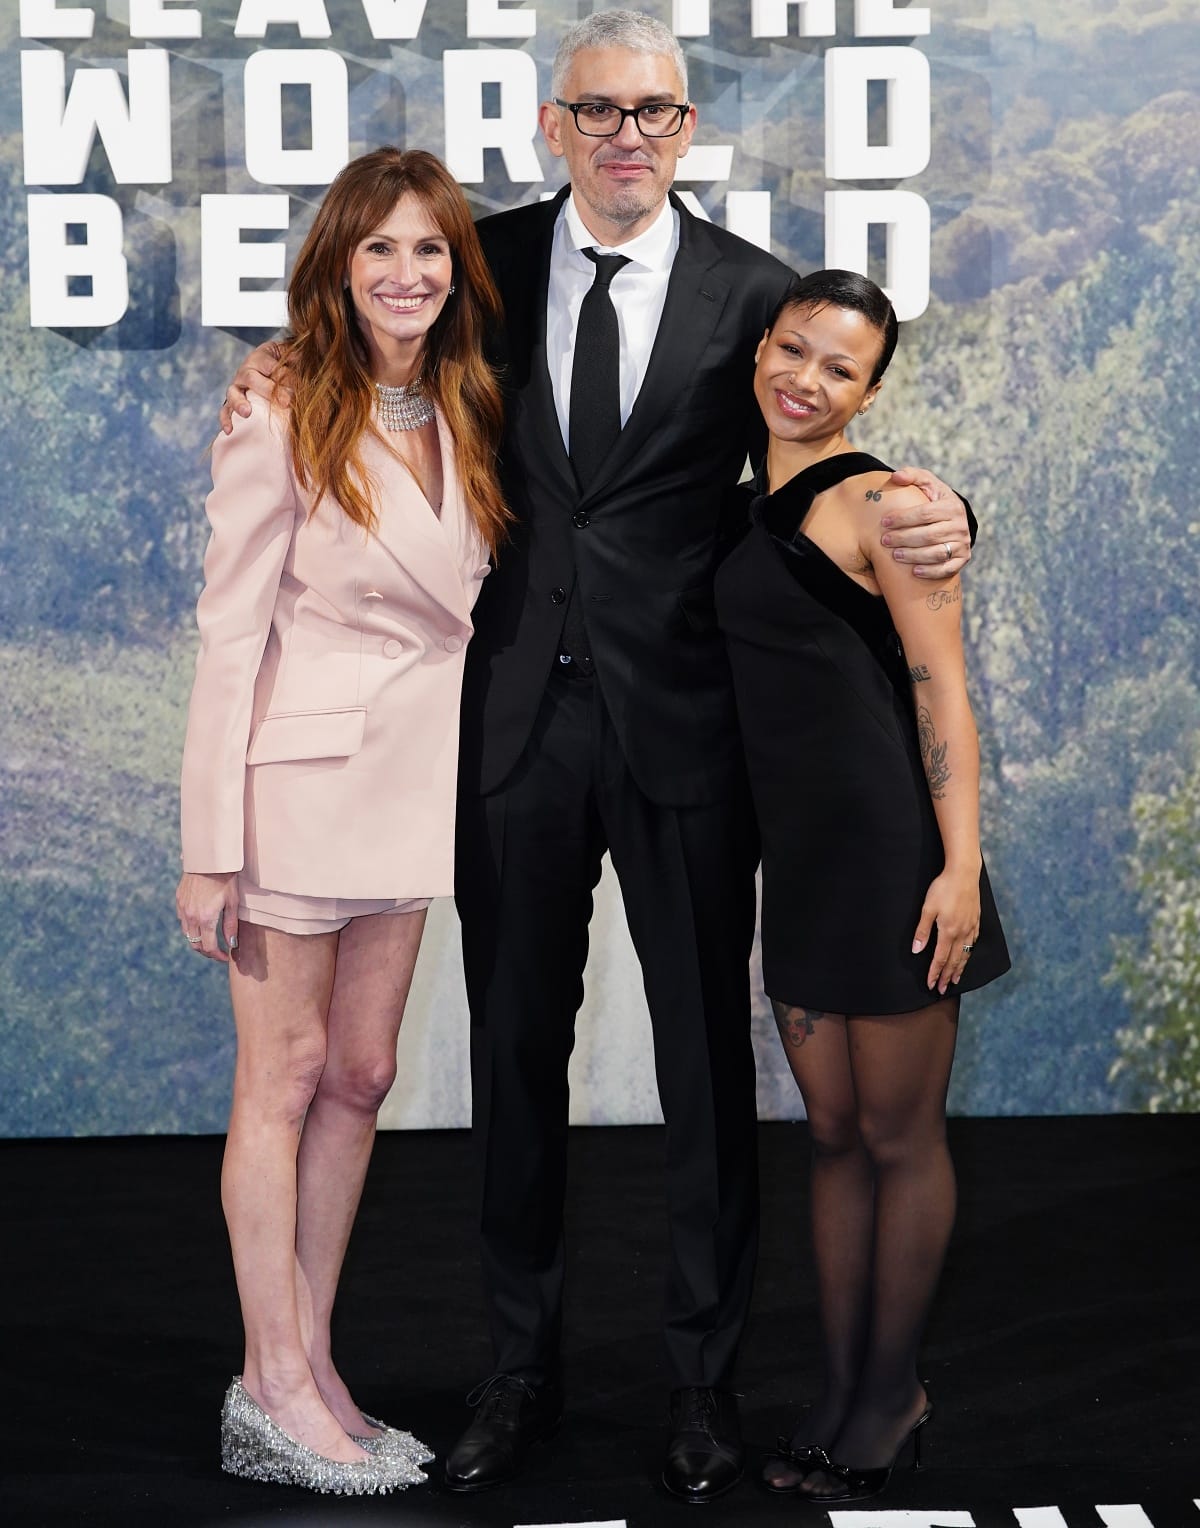 Julia Roberts, who stands at 5 feet 8 inches (172.7 cm), posed for photographs with director Sam Esmail, the tallest at 6 feet 4 inches (193 cm), and her co-star Myha’la Herrold, who is 5 feet ½ inch (153.7 cm) tall, at the Leave the World Behind special screening in London